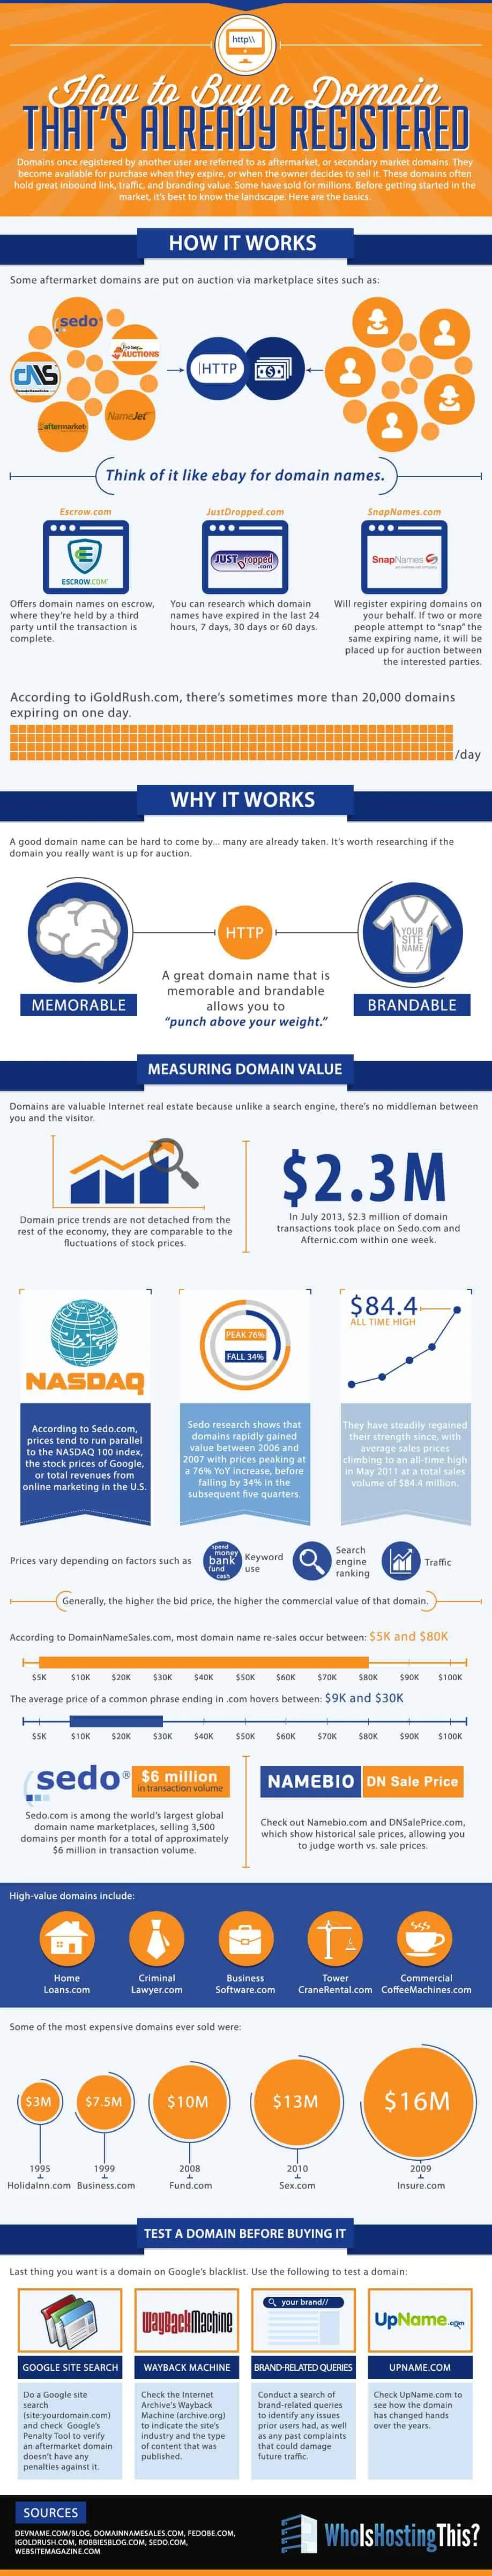 How to Buy That Domain You’ve Always Wanted (But’s Not For Sale) - #infographic